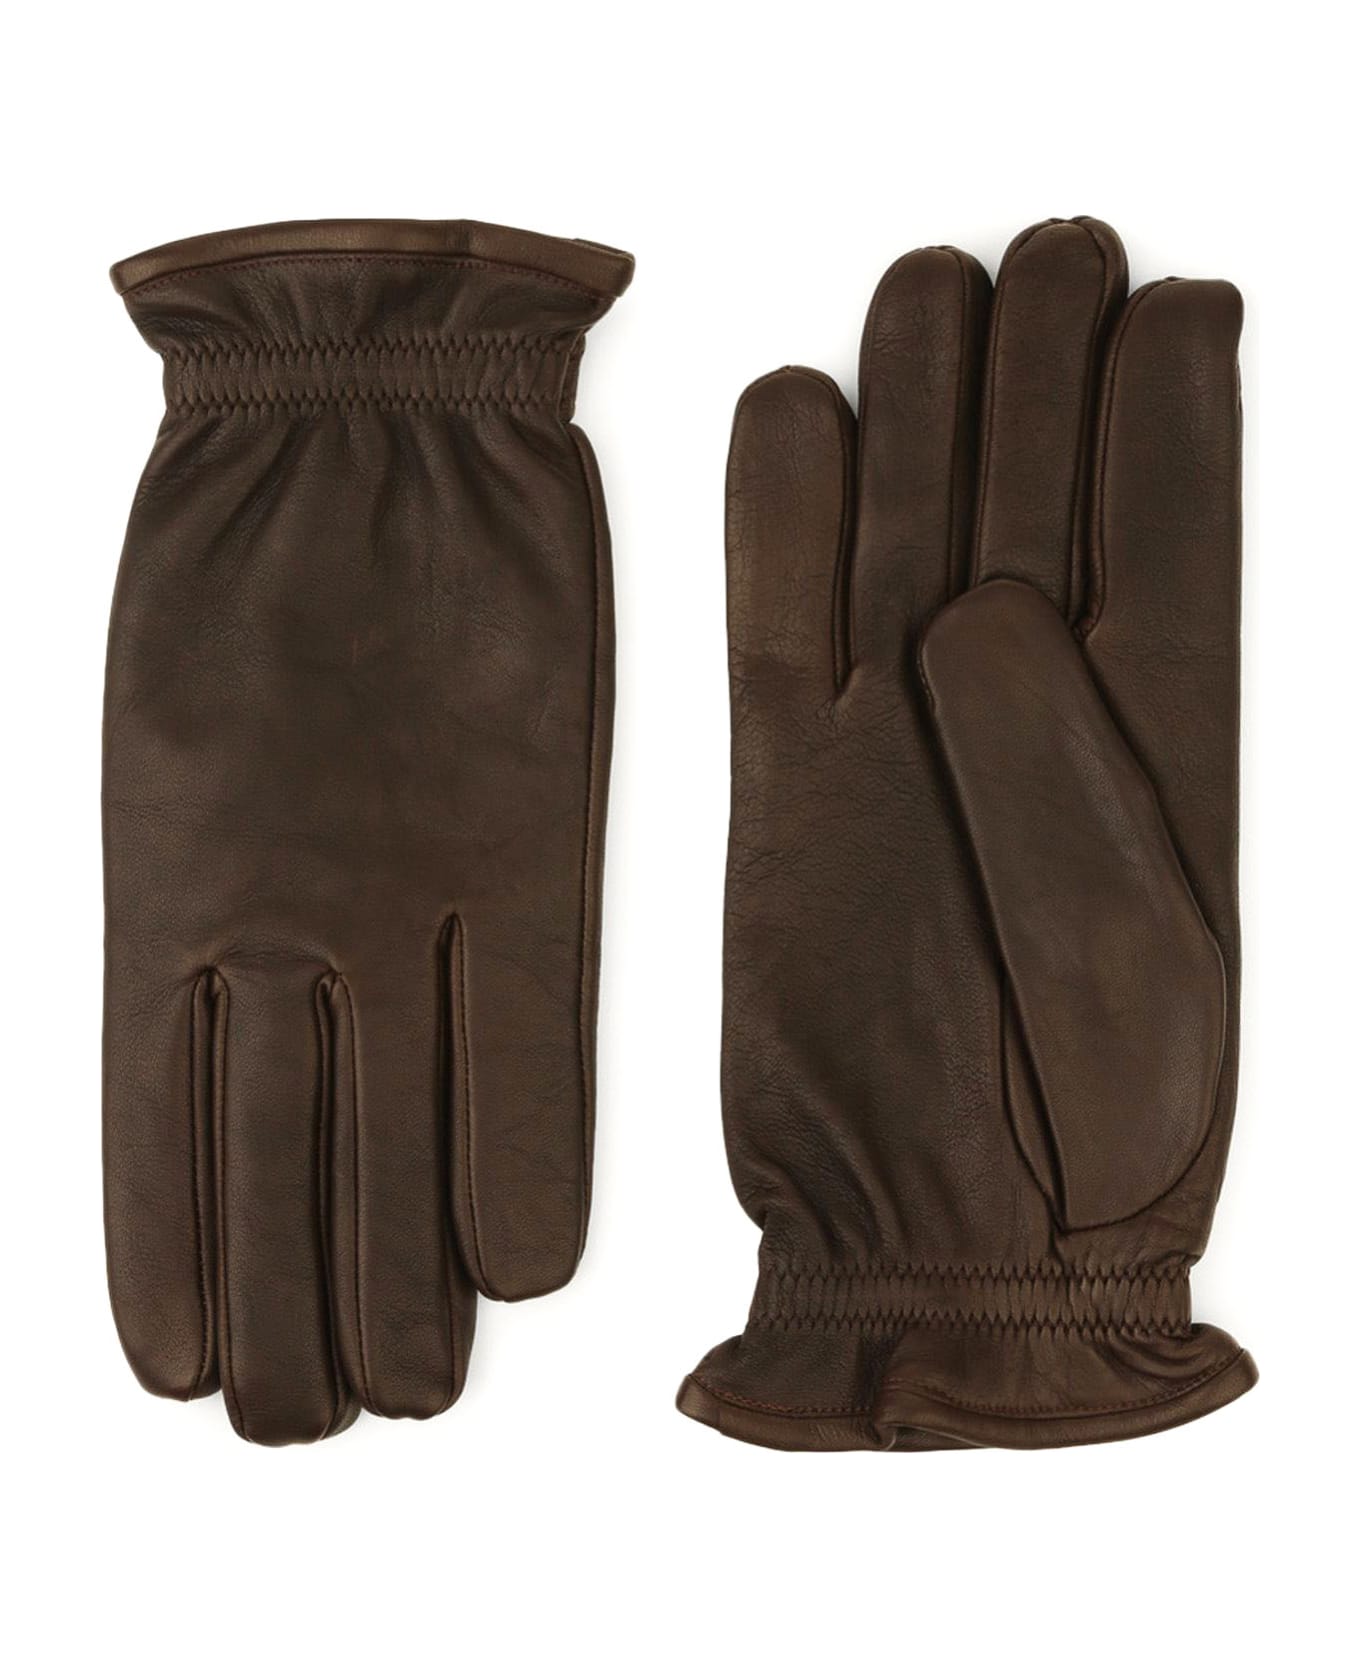 Orciani Nappa Washed Leather Gloves - Brown